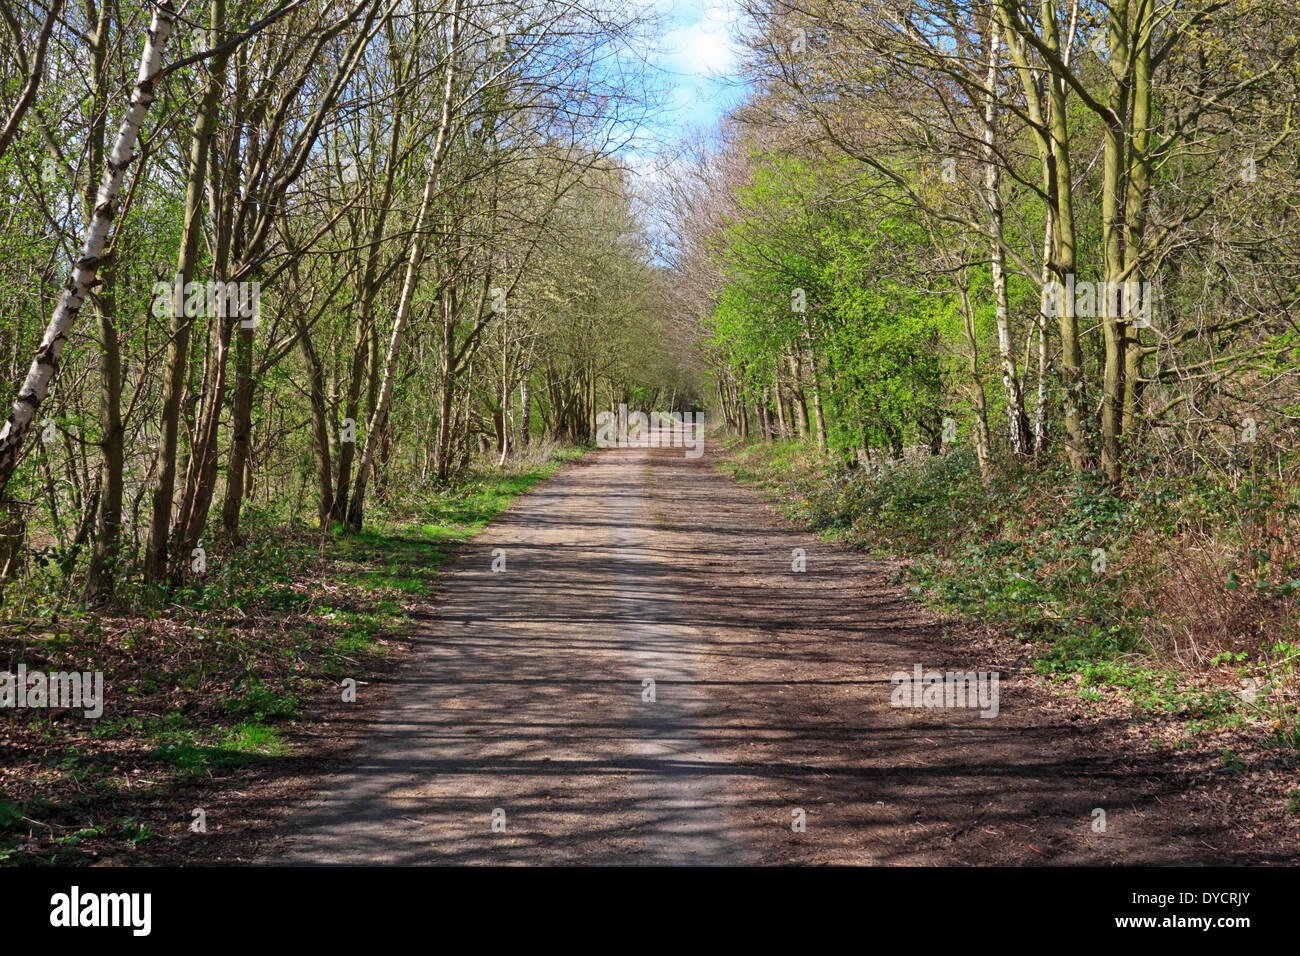 The Trans Pennine Trail, Upper Don Trail, Wortley, Barnsley, South Yorkshire, England, UK. Stock Photo